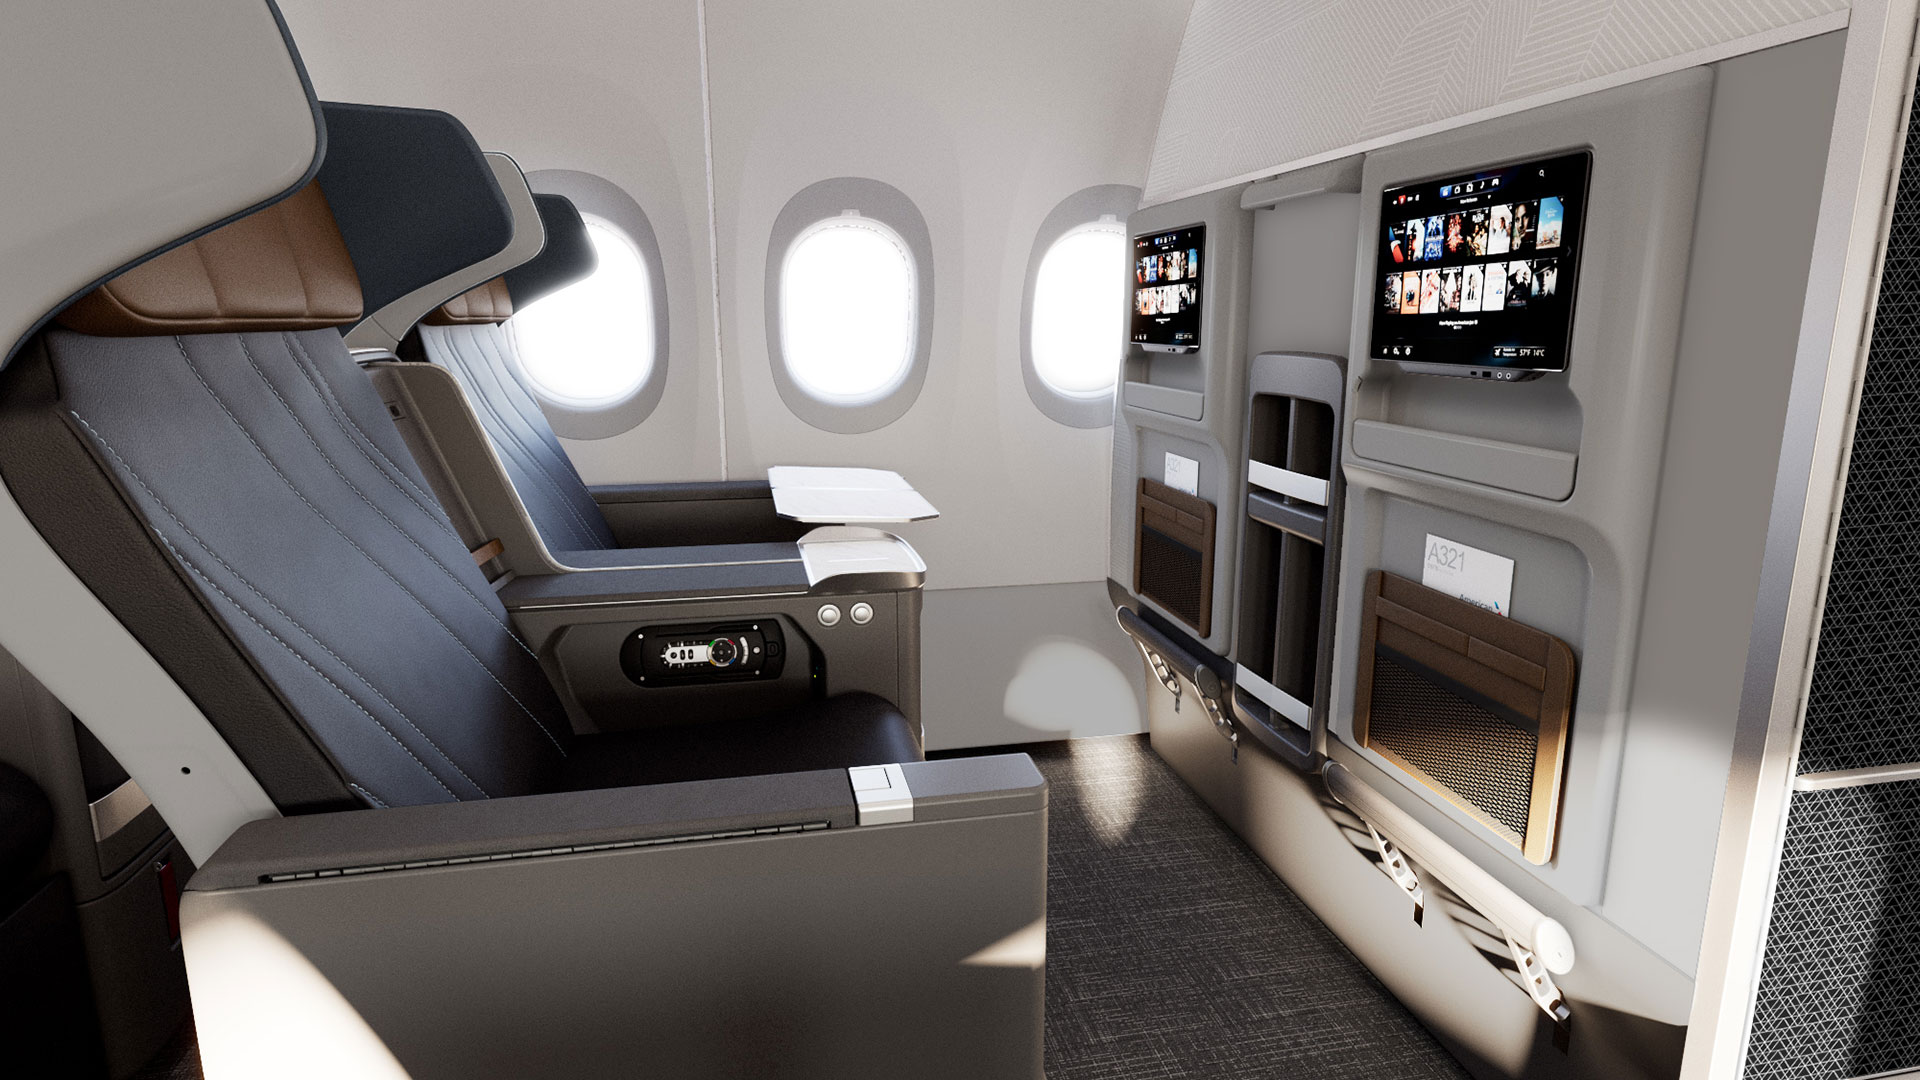 The premium economy seats on the airbus a321xlr have headrest wings for increased privacy